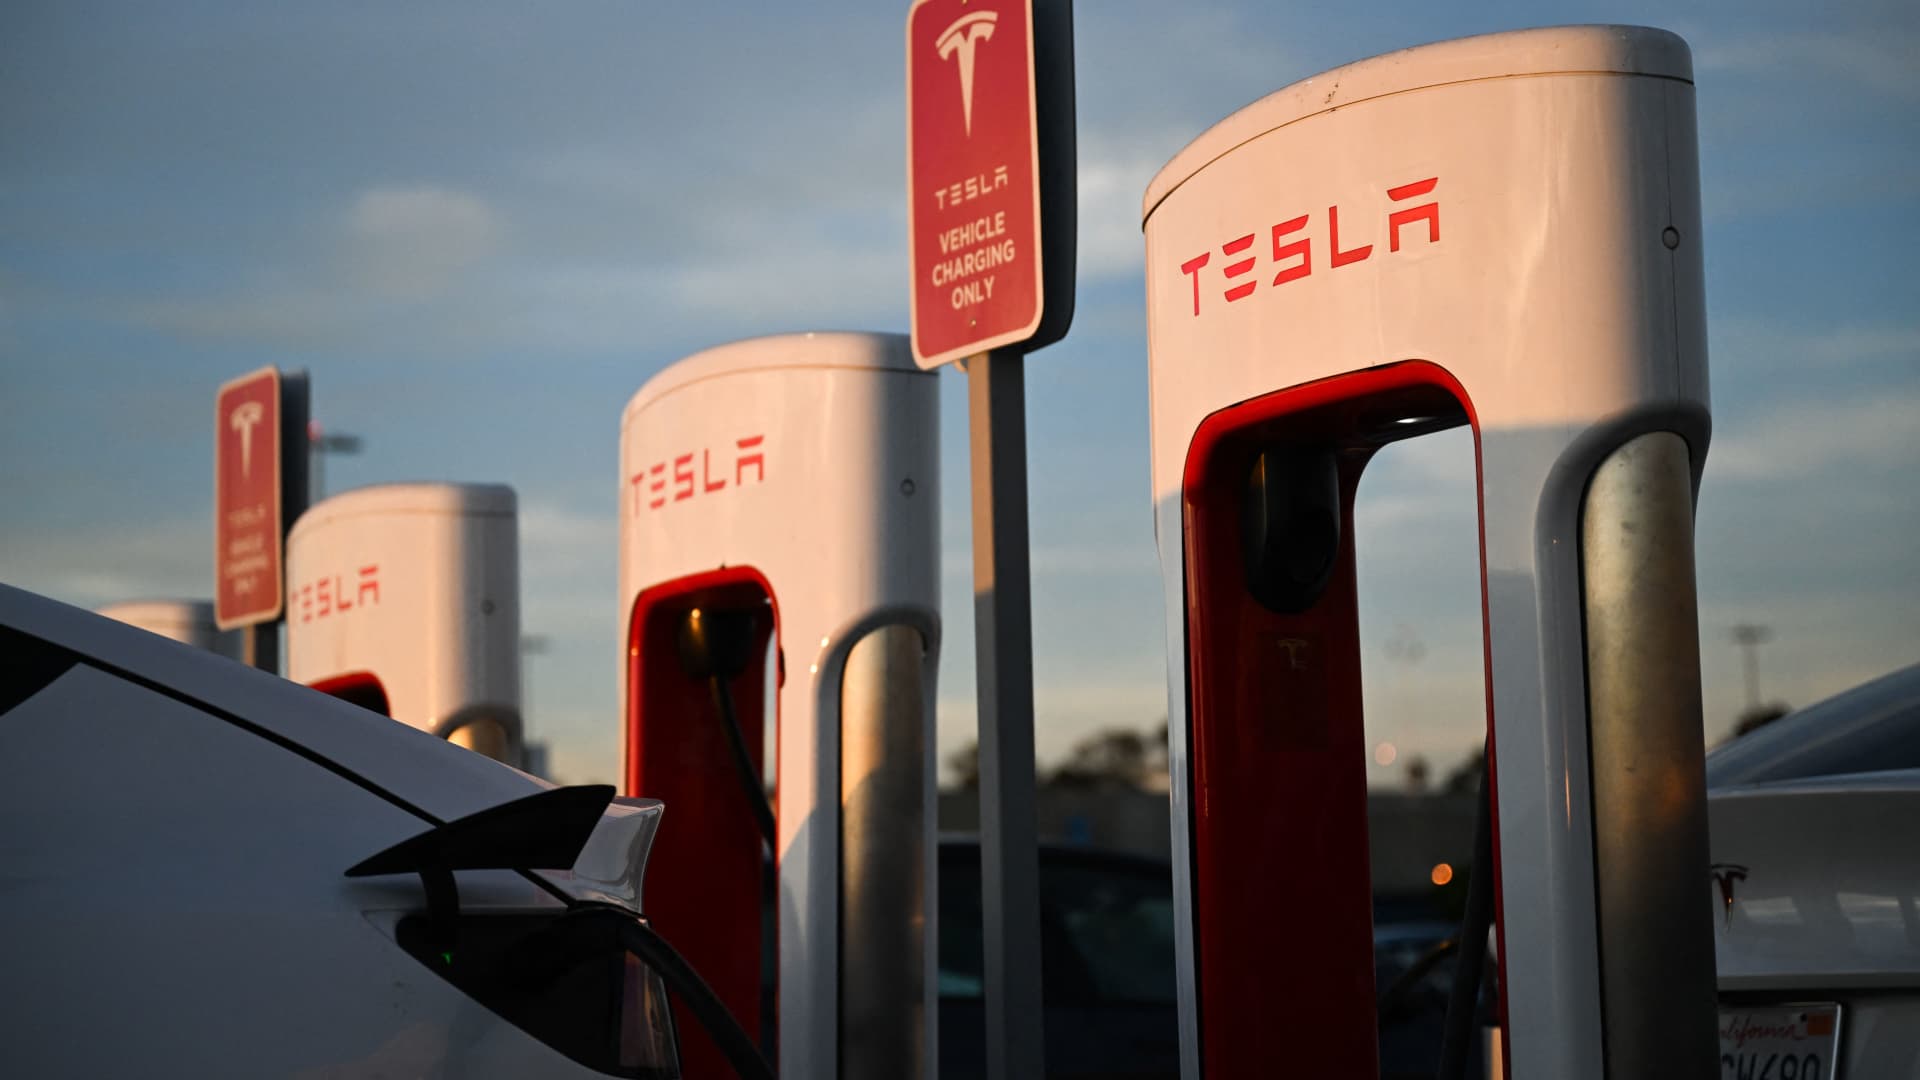 Forget TSLA? 2 EV stock picks to play the boom, from Citi and HSBC